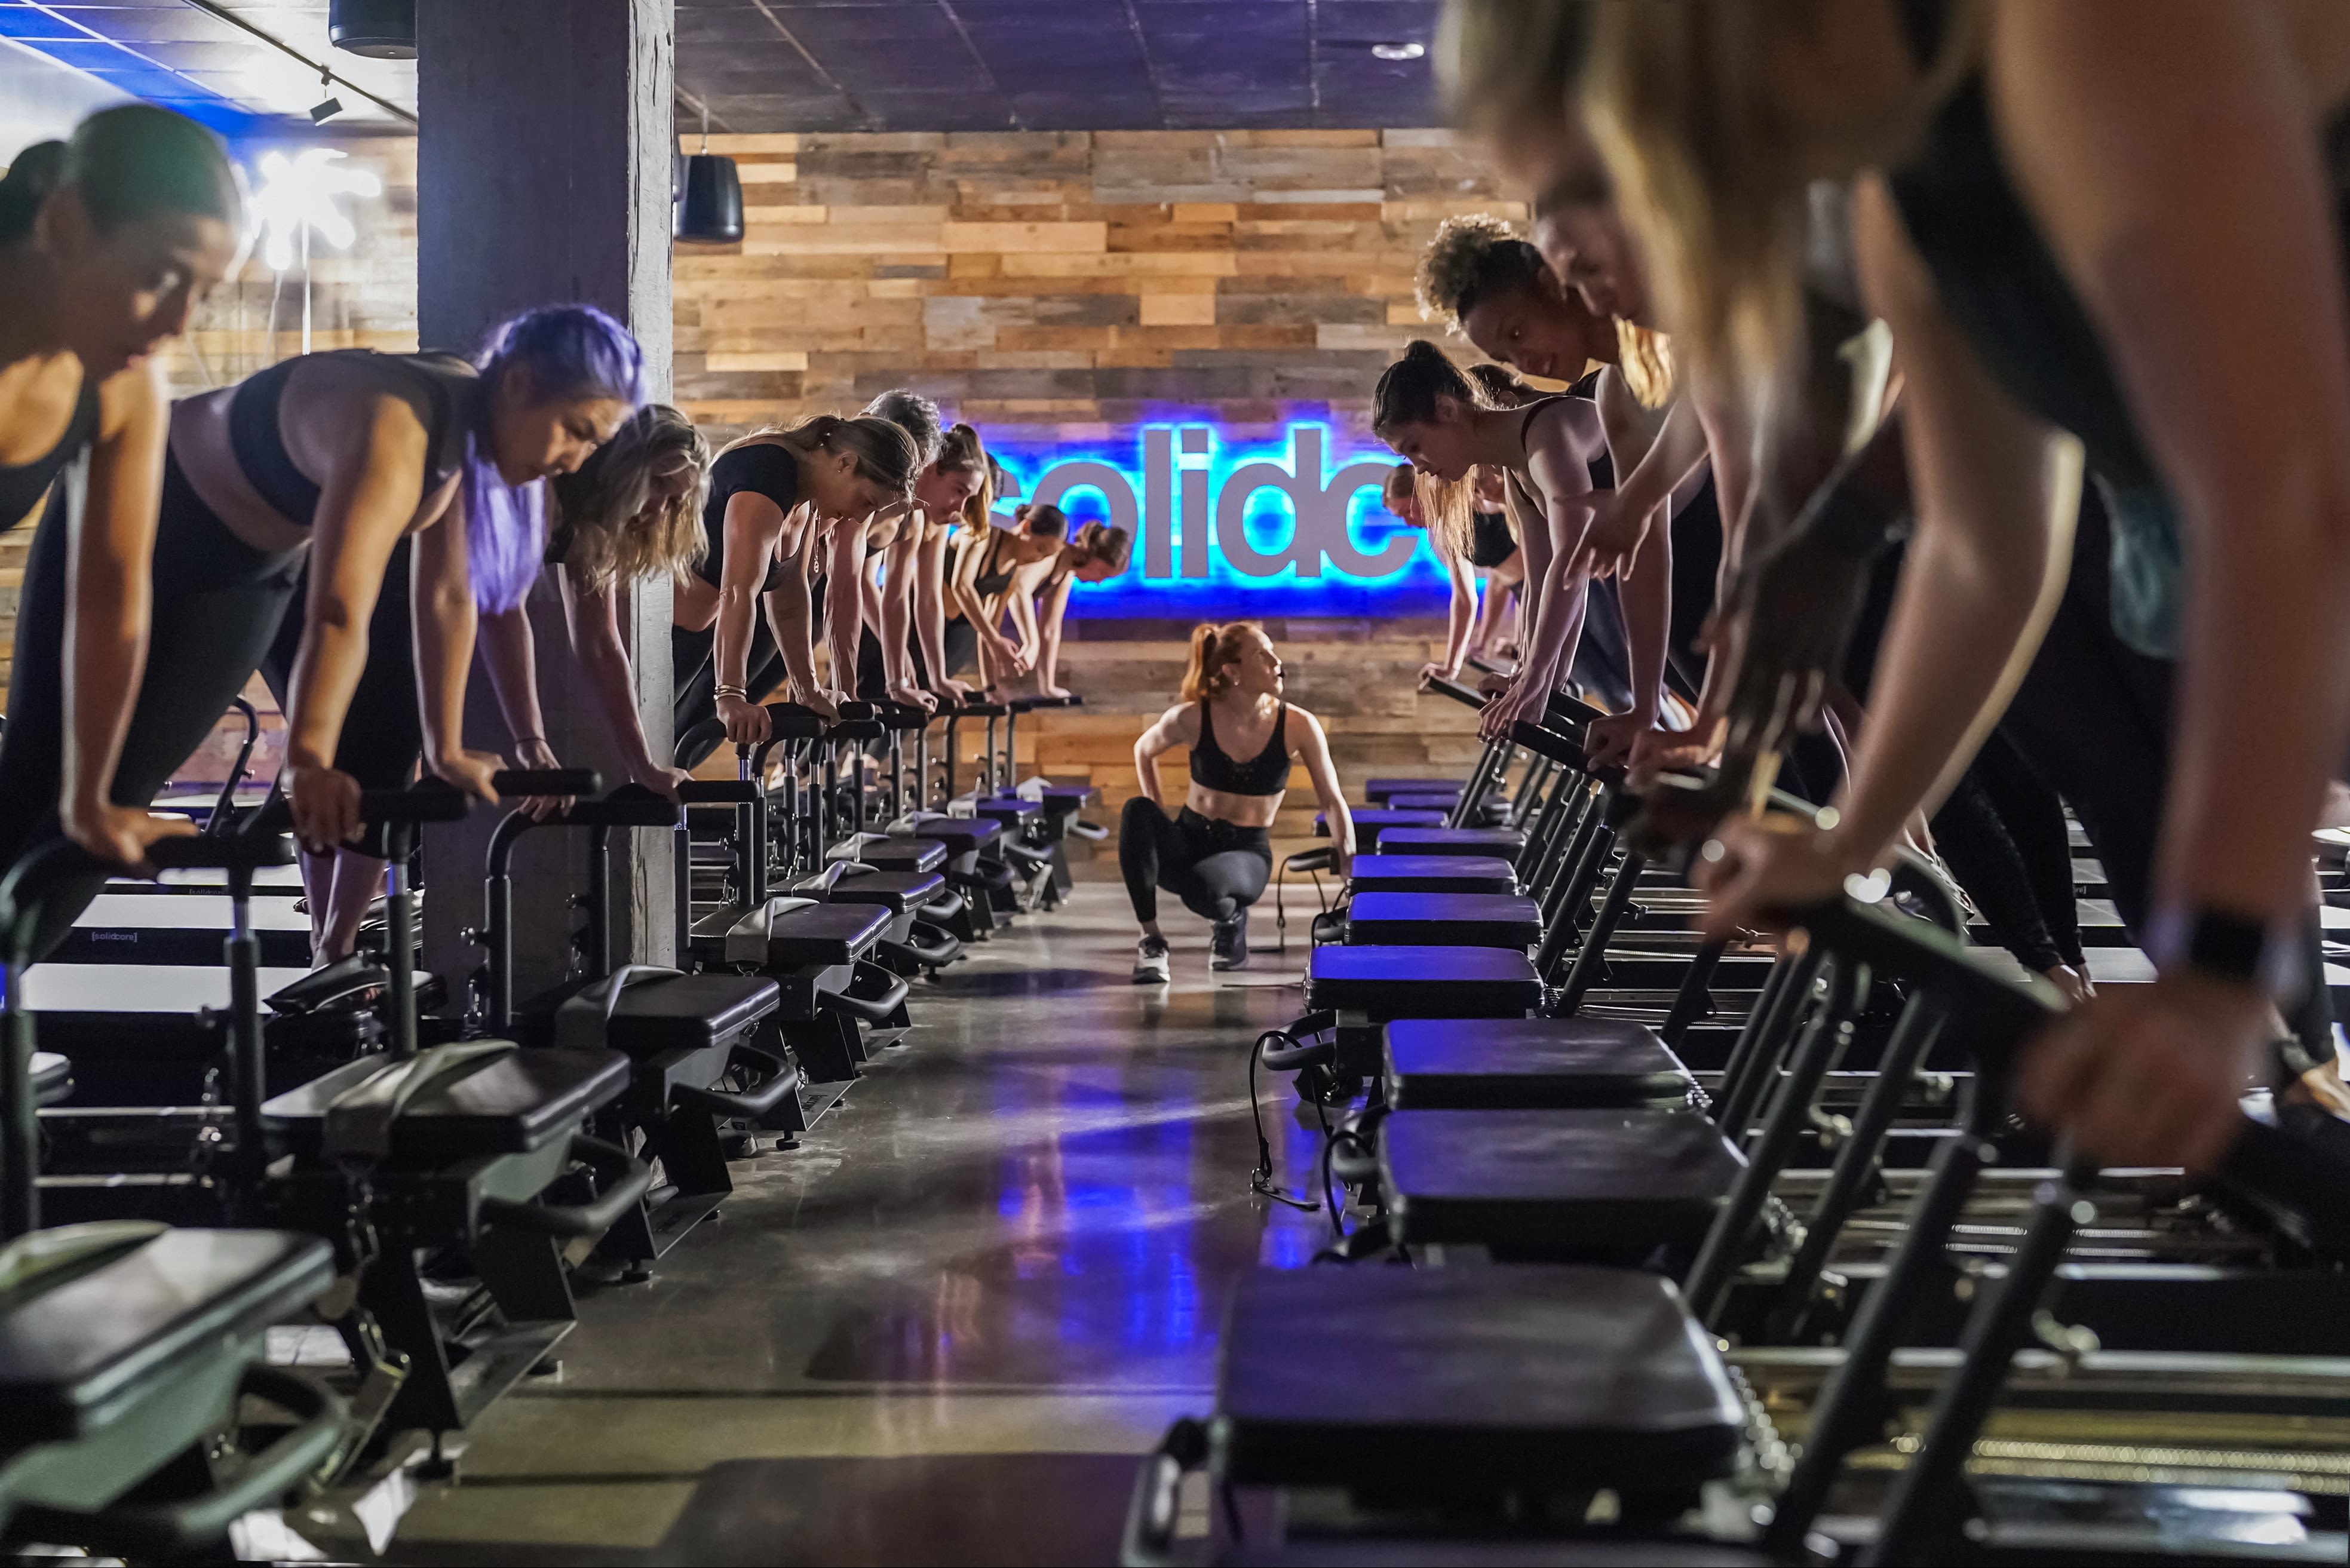 solidcore] - West Loop: Read Reviews and Book Classes on ClassPass